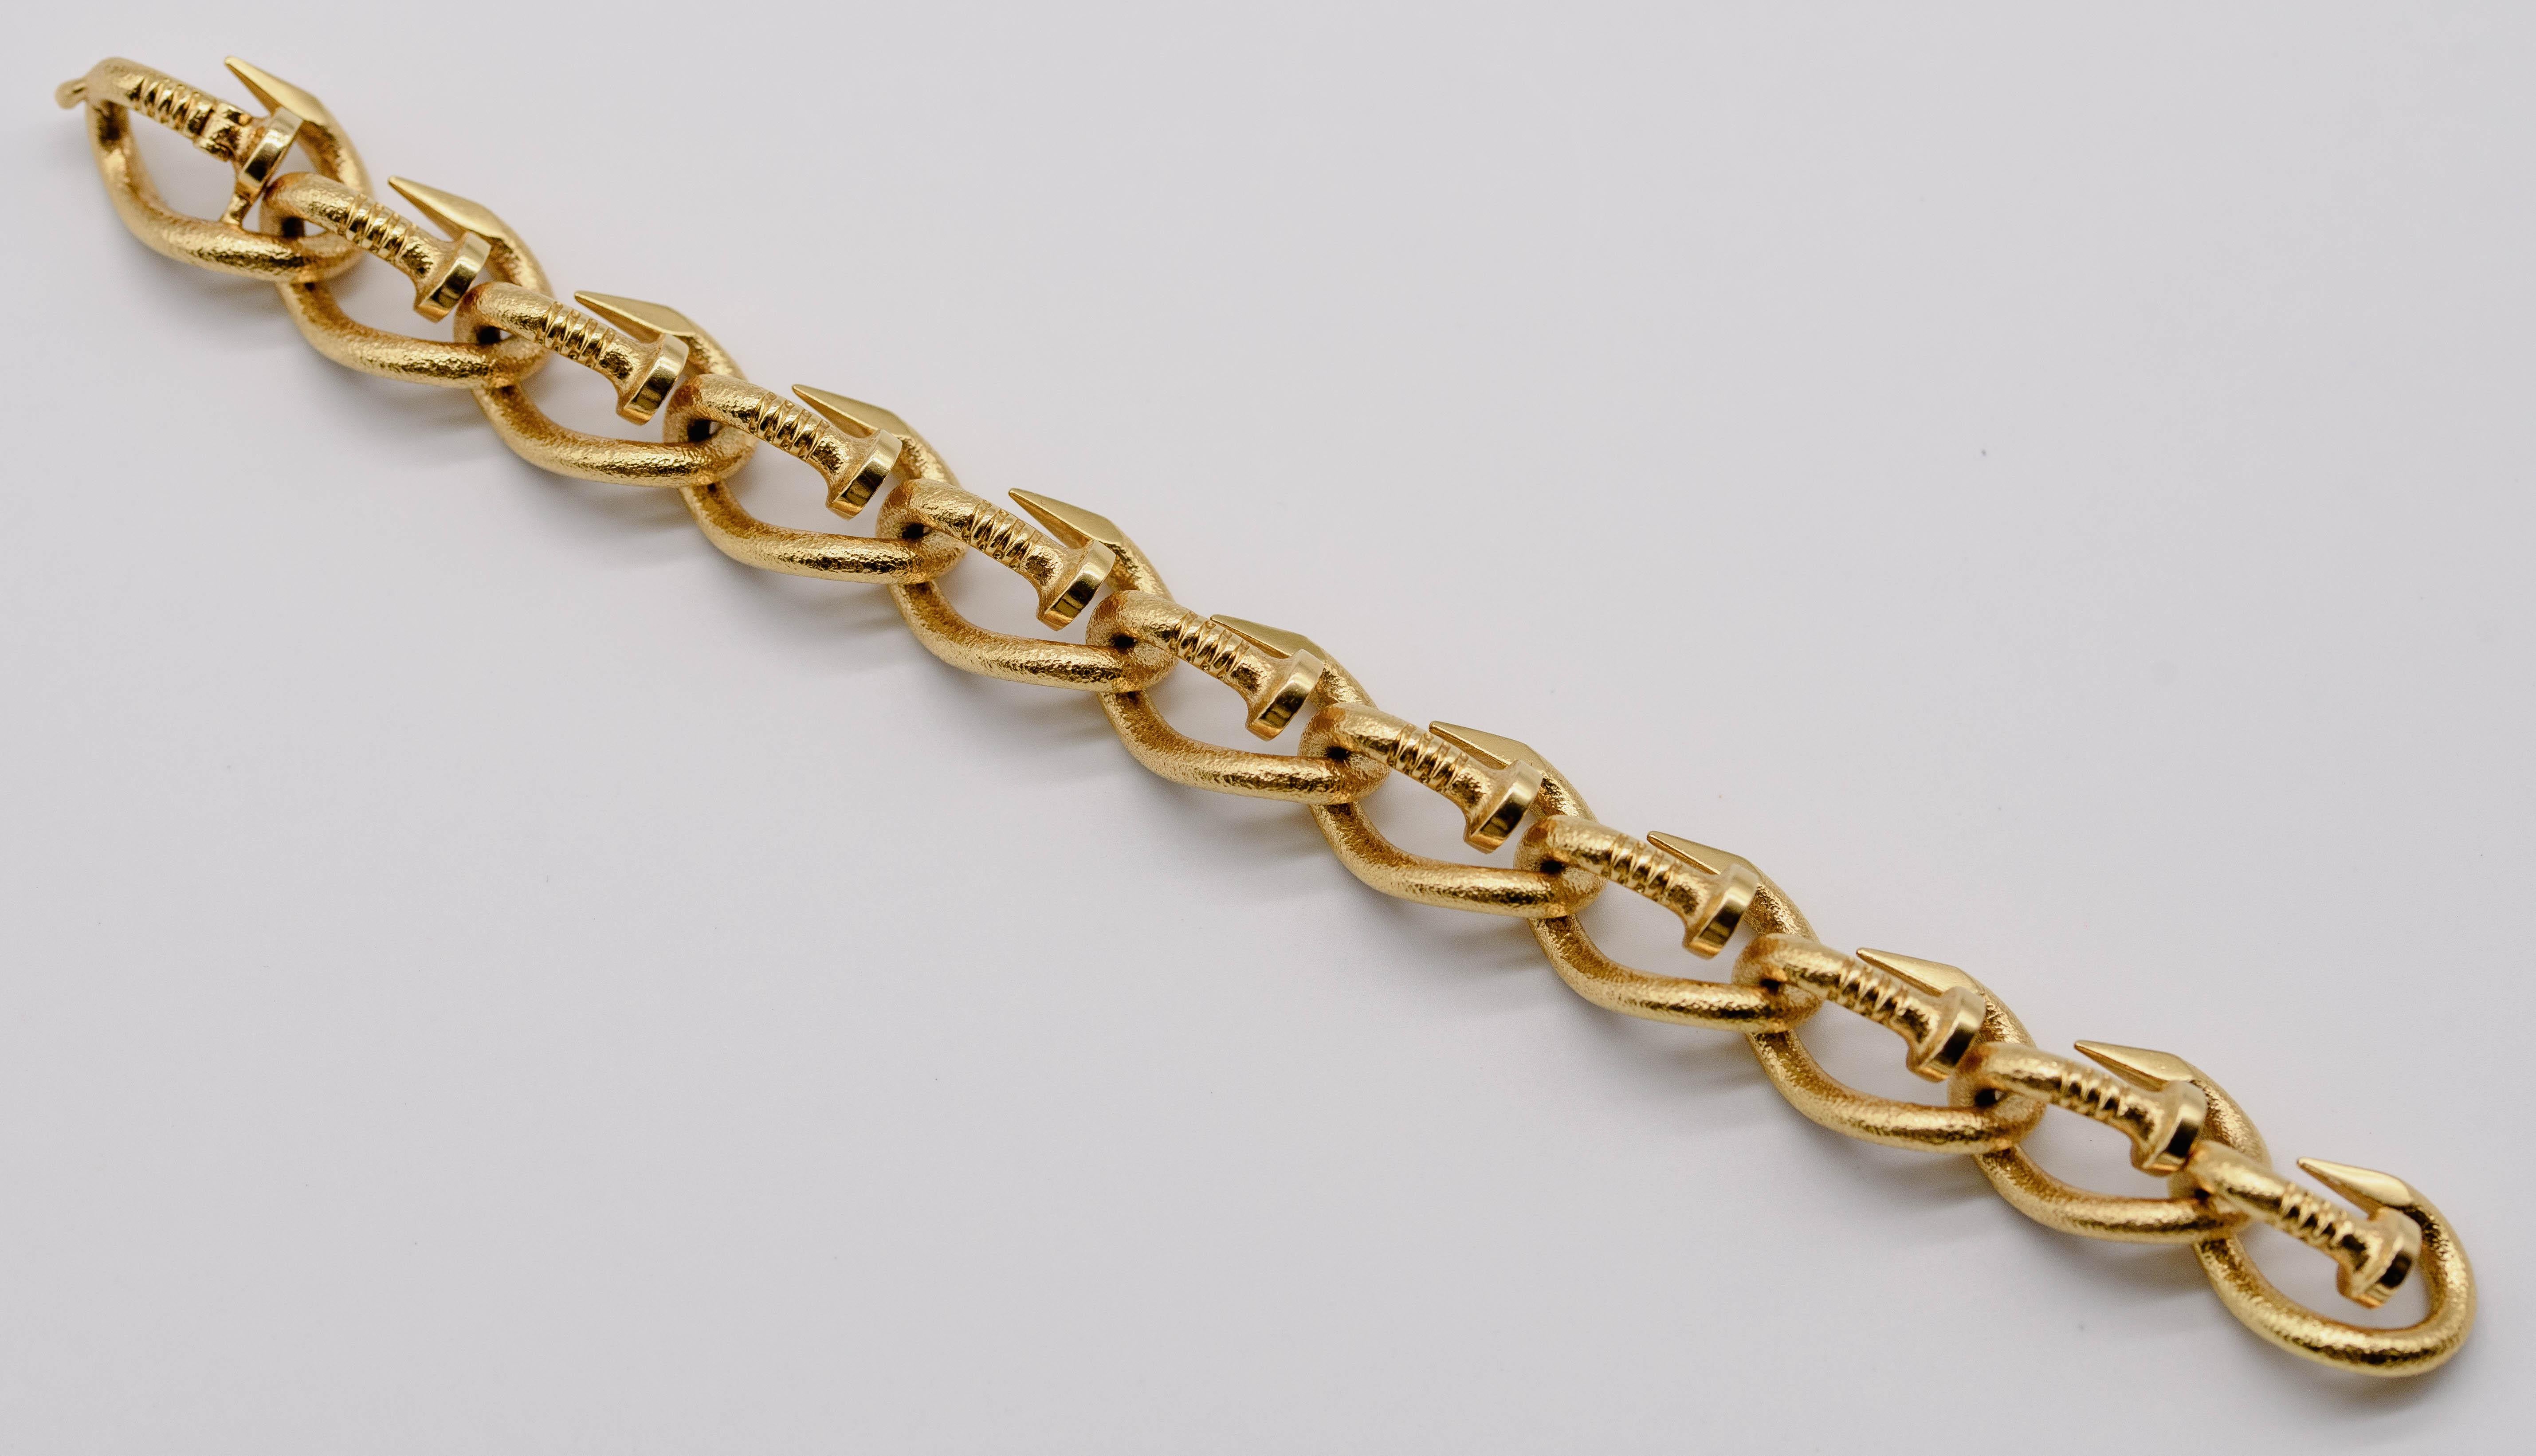 A timeless classic from a timeless maker, this gorgeous jewel can be worn anywhere, anytime.  7 1/4 inches in length, crafted in warm and rich 18 karat yellow gold; hefting it in the palm of your hand  makes you feel the density of the metal.   Upon